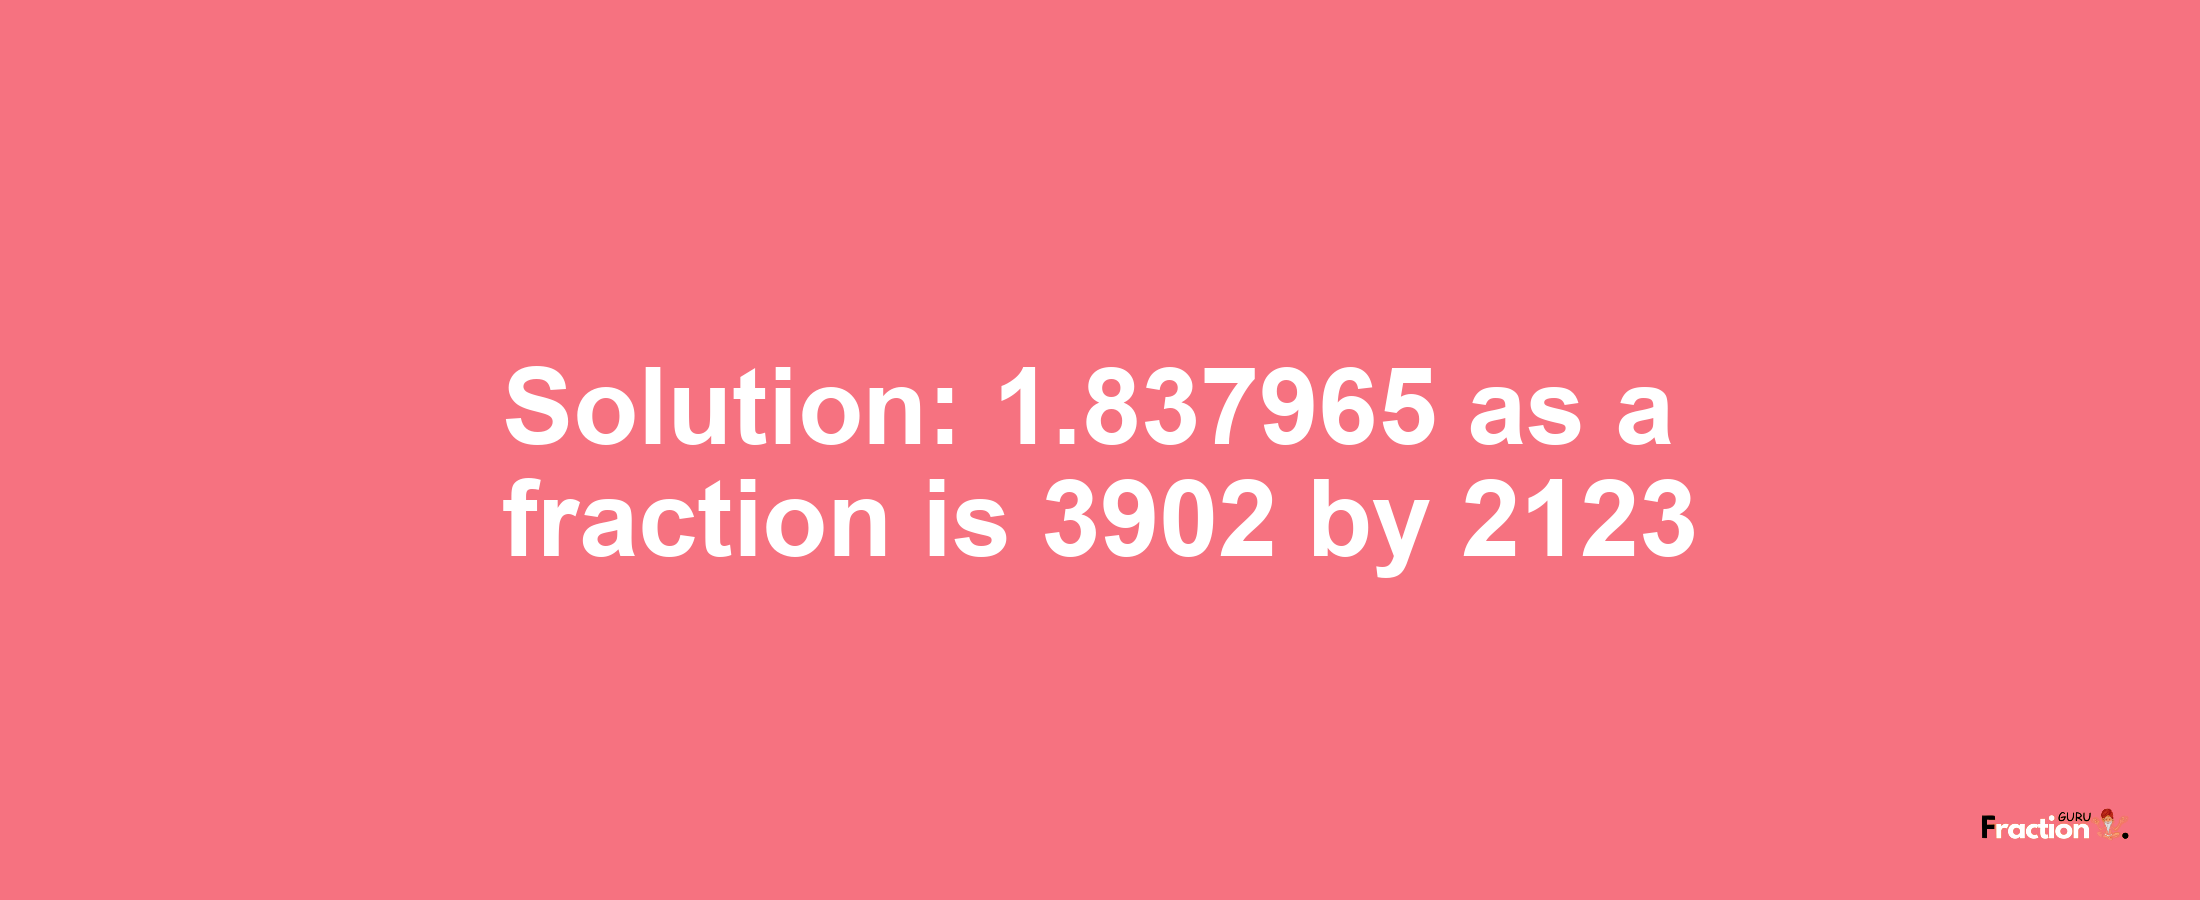 Solution:1.837965 as a fraction is 3902/2123